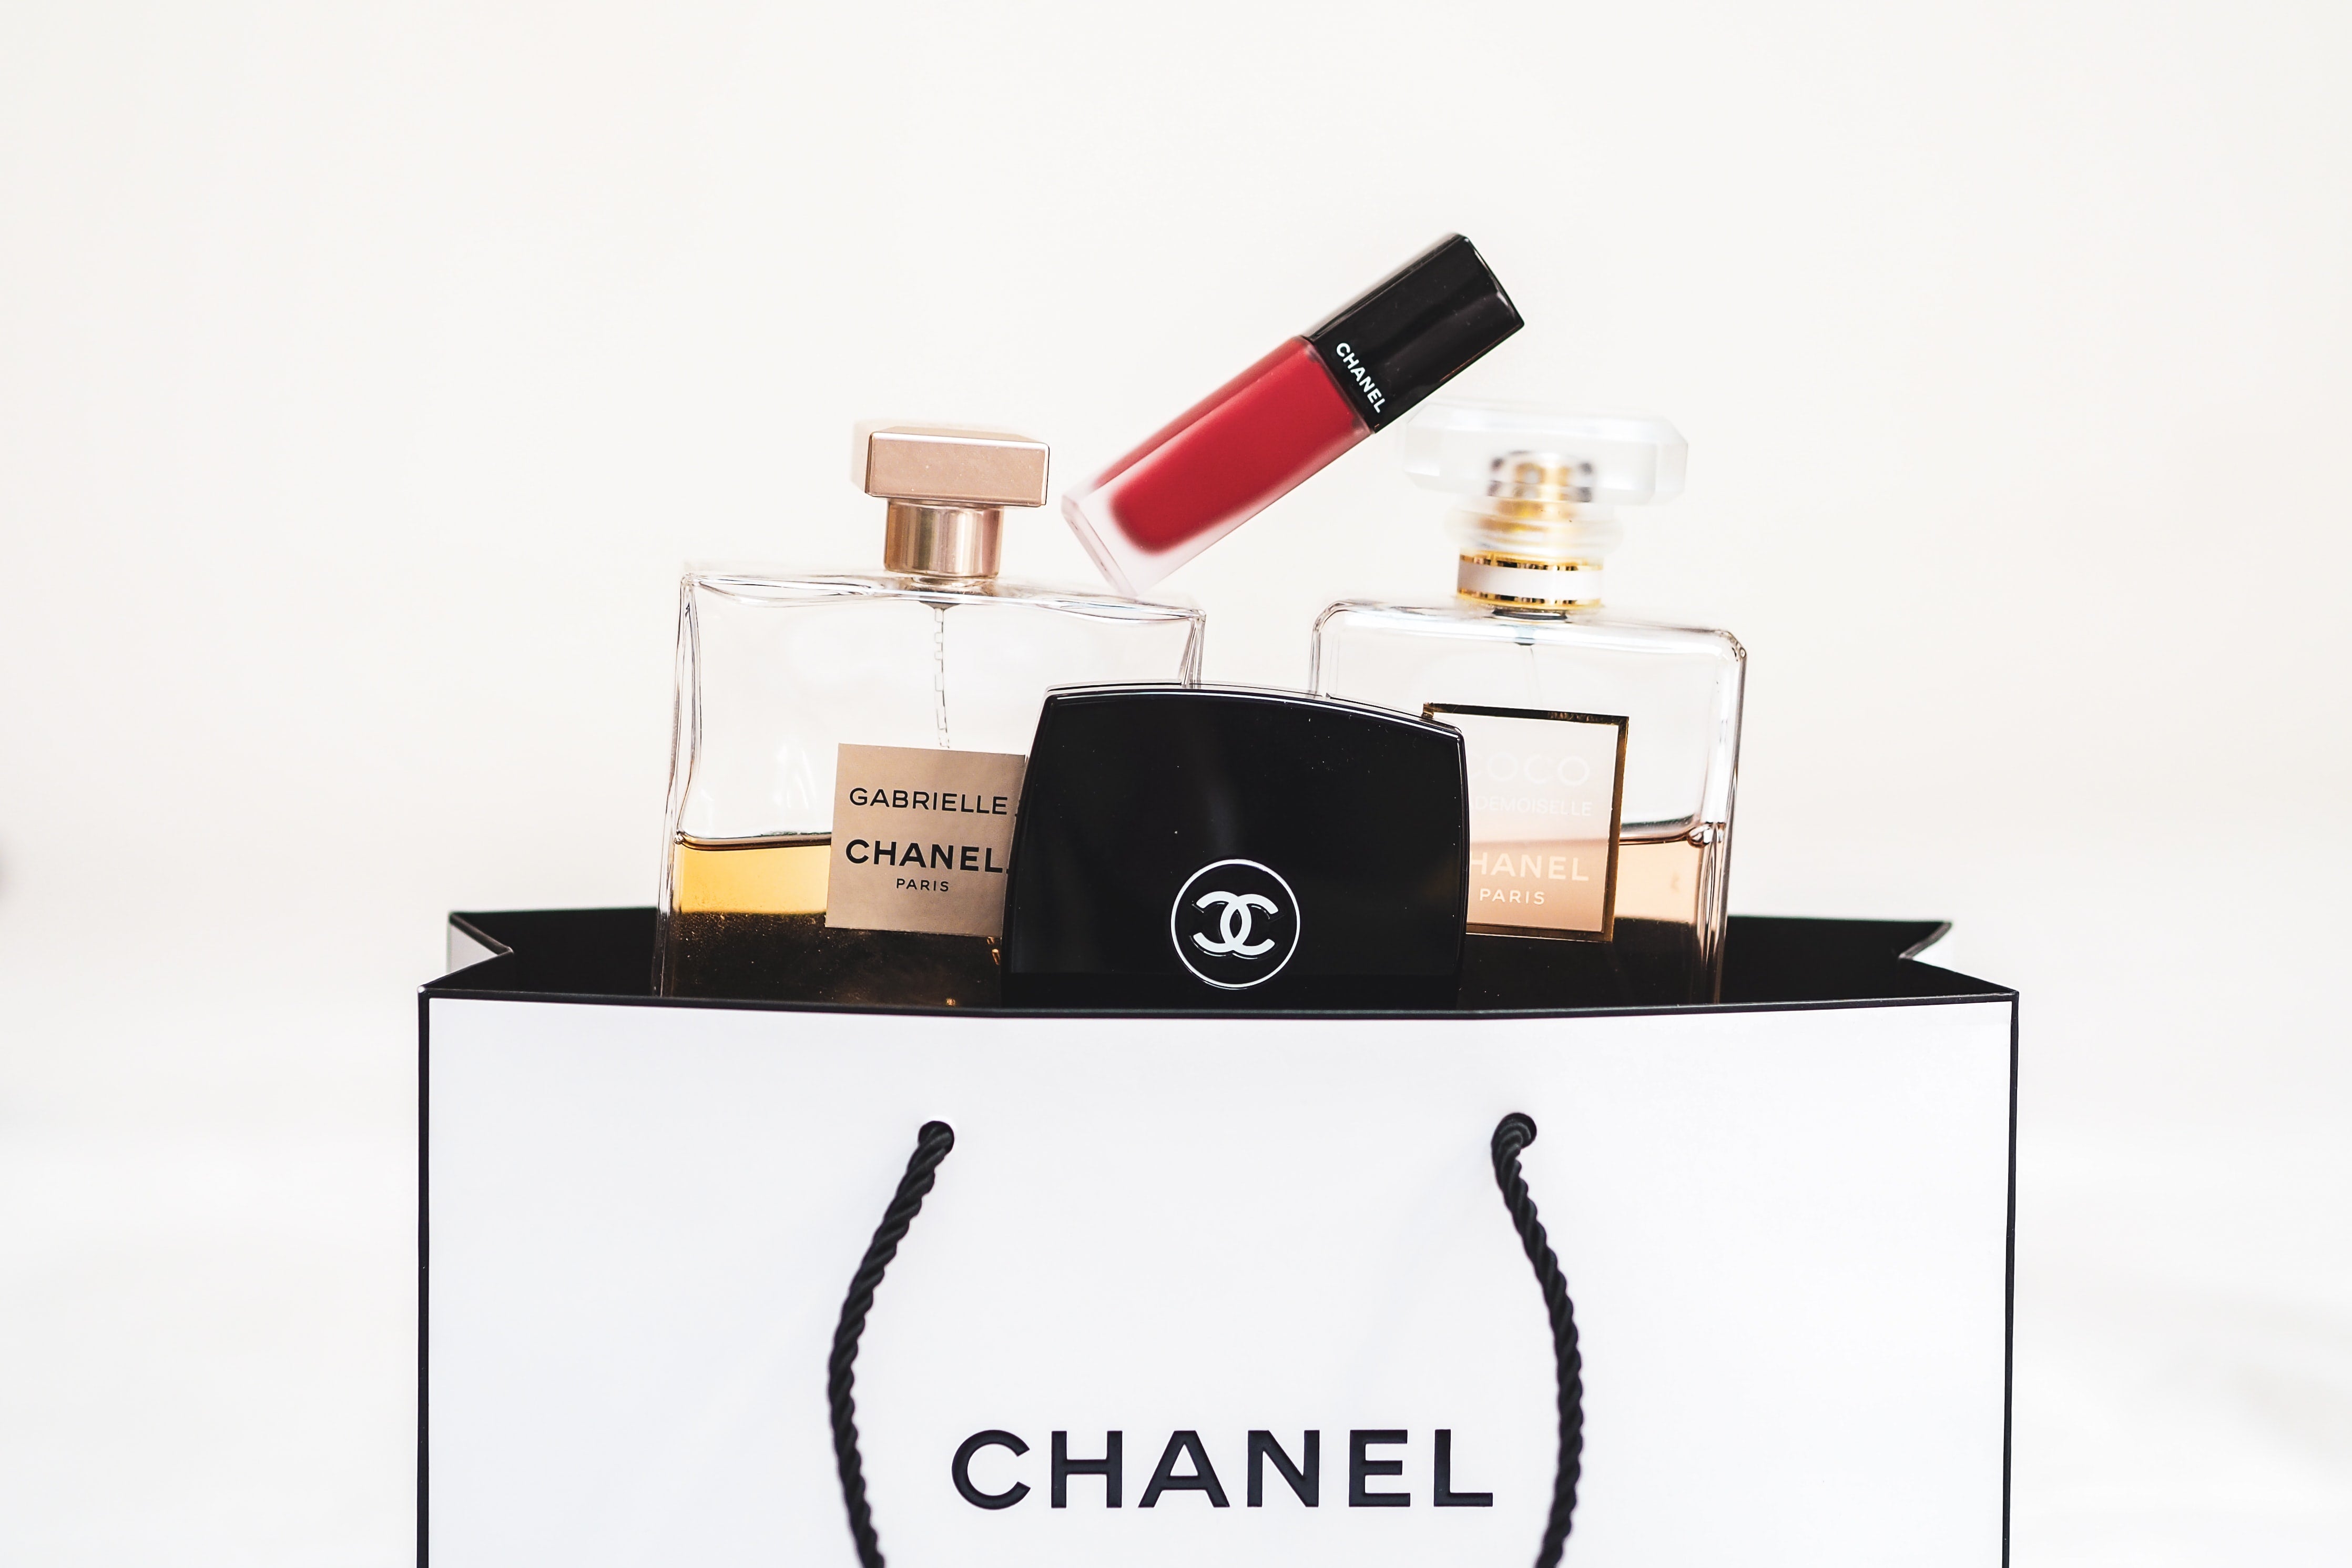 Chanel - Fashion Brand, Founder, Startup Story